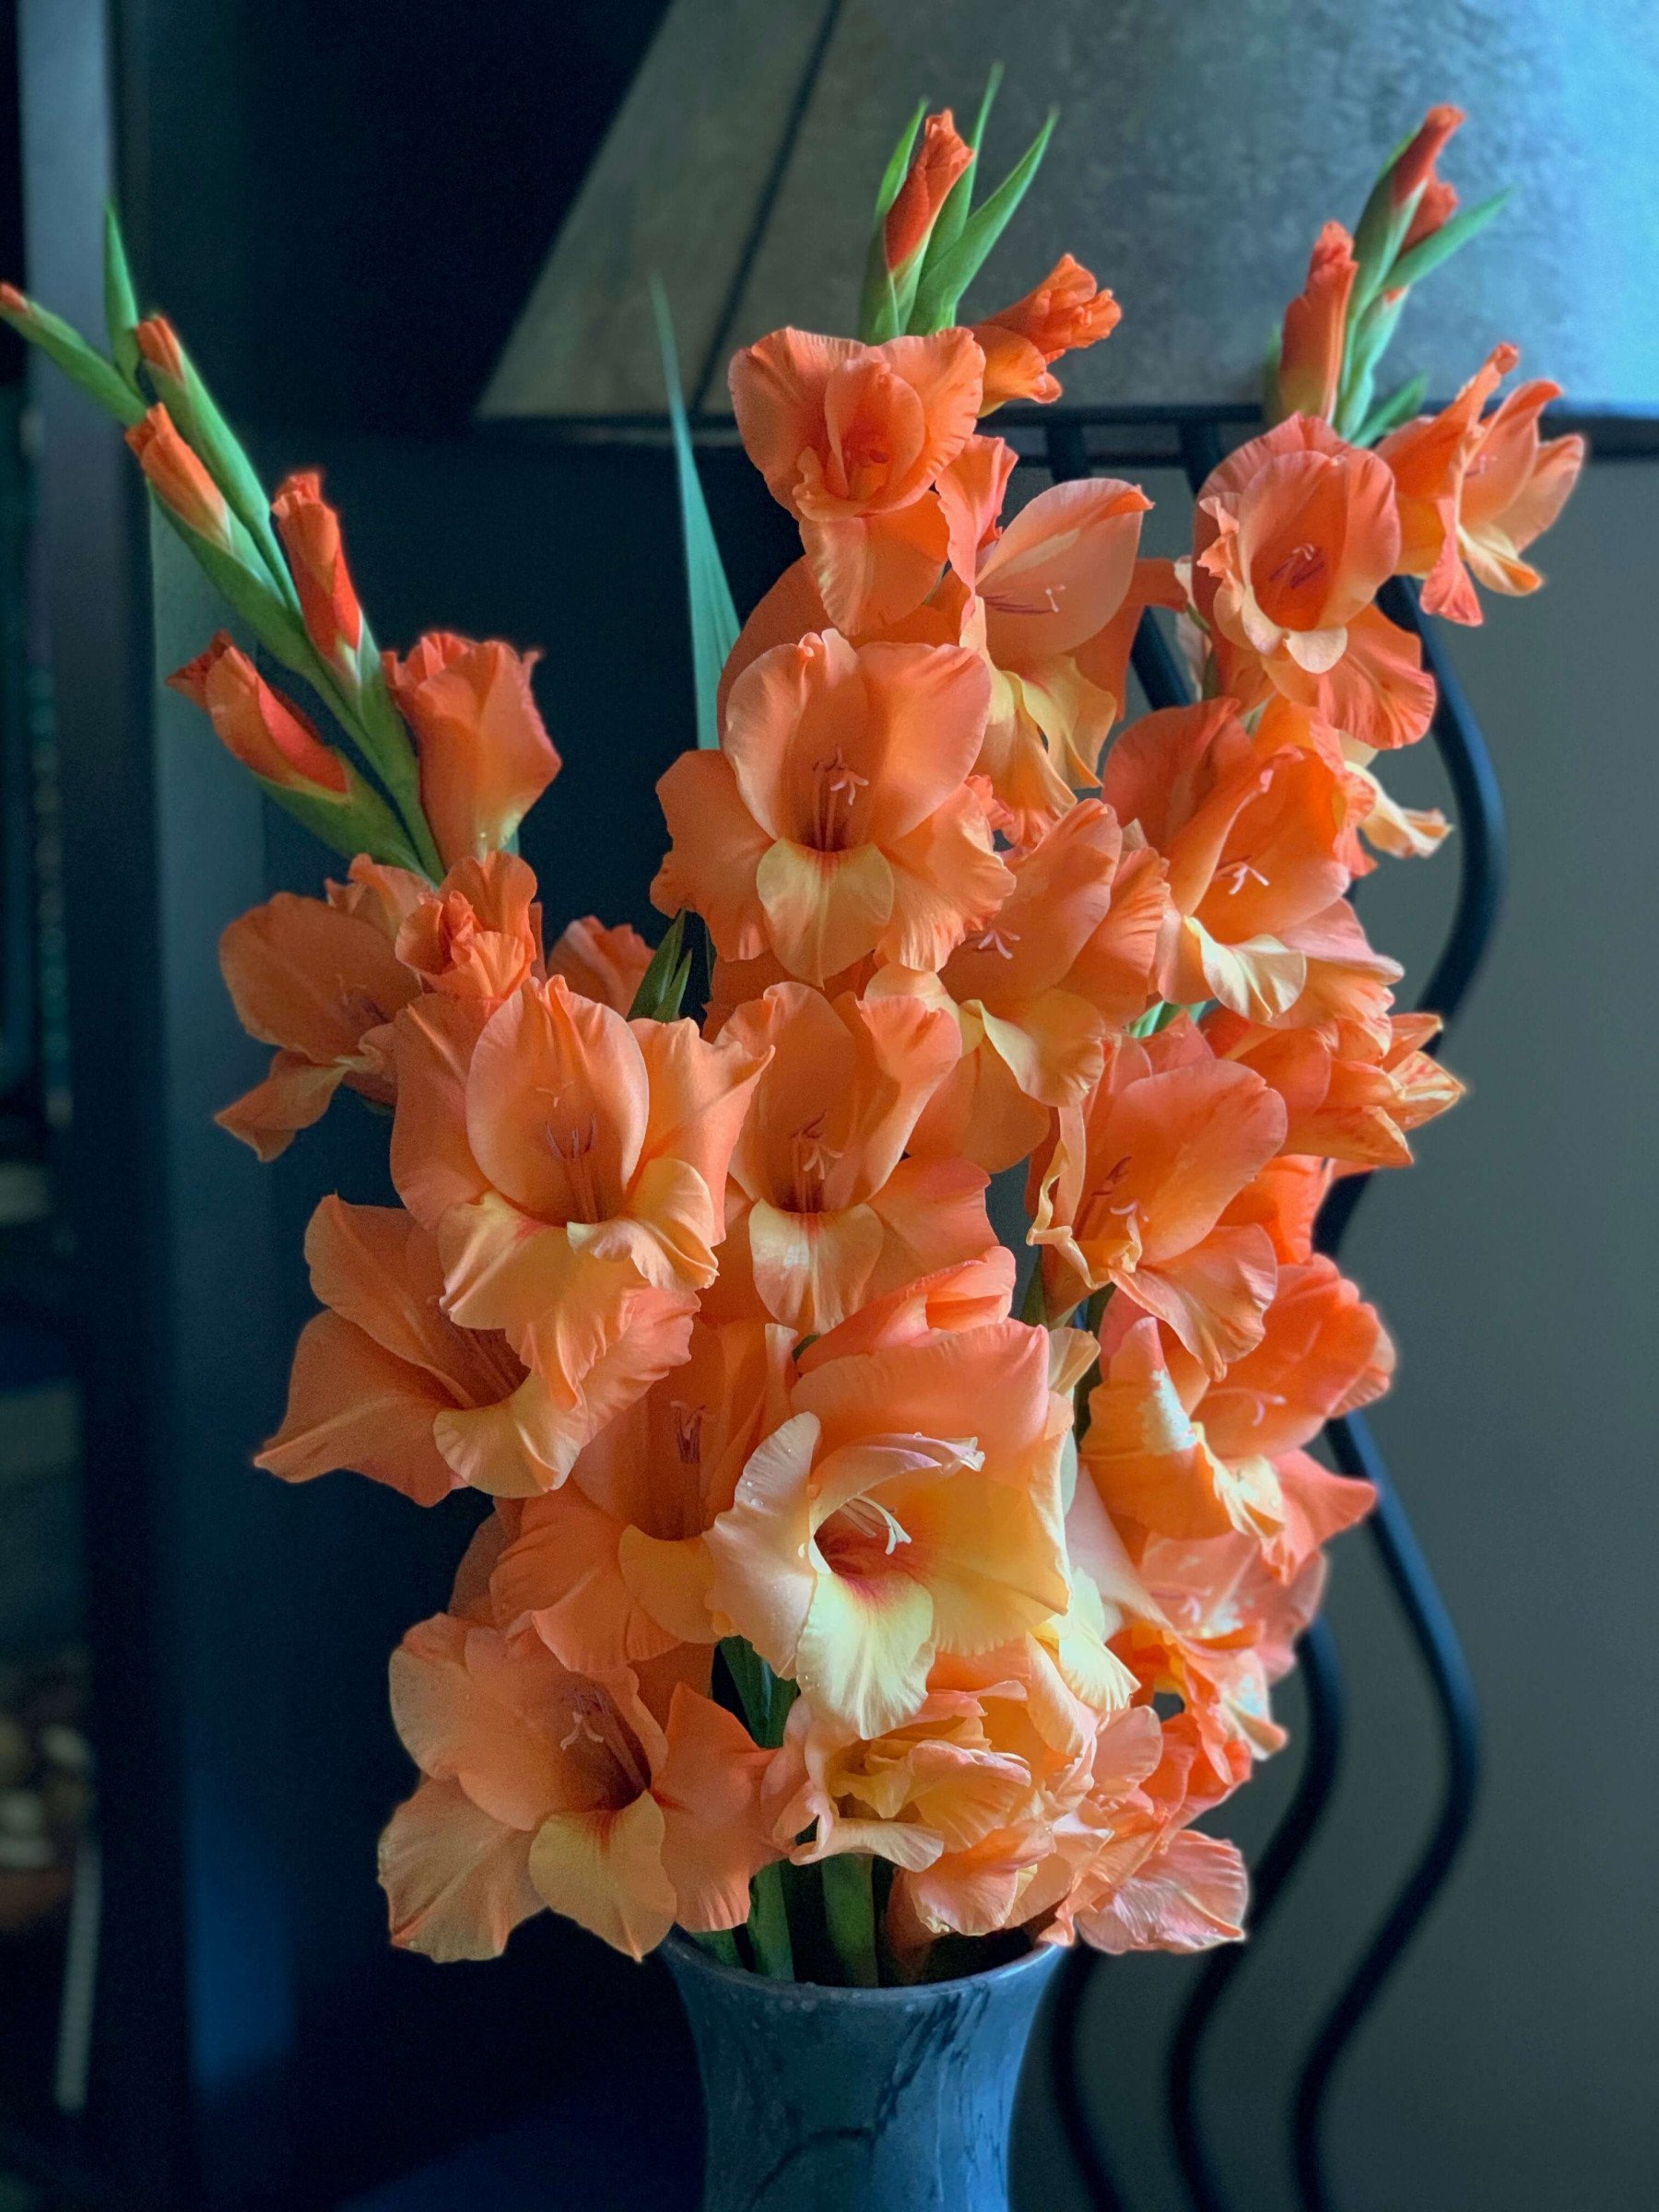 Tips for Growing and Using Gladiolus - Longfield Gardens